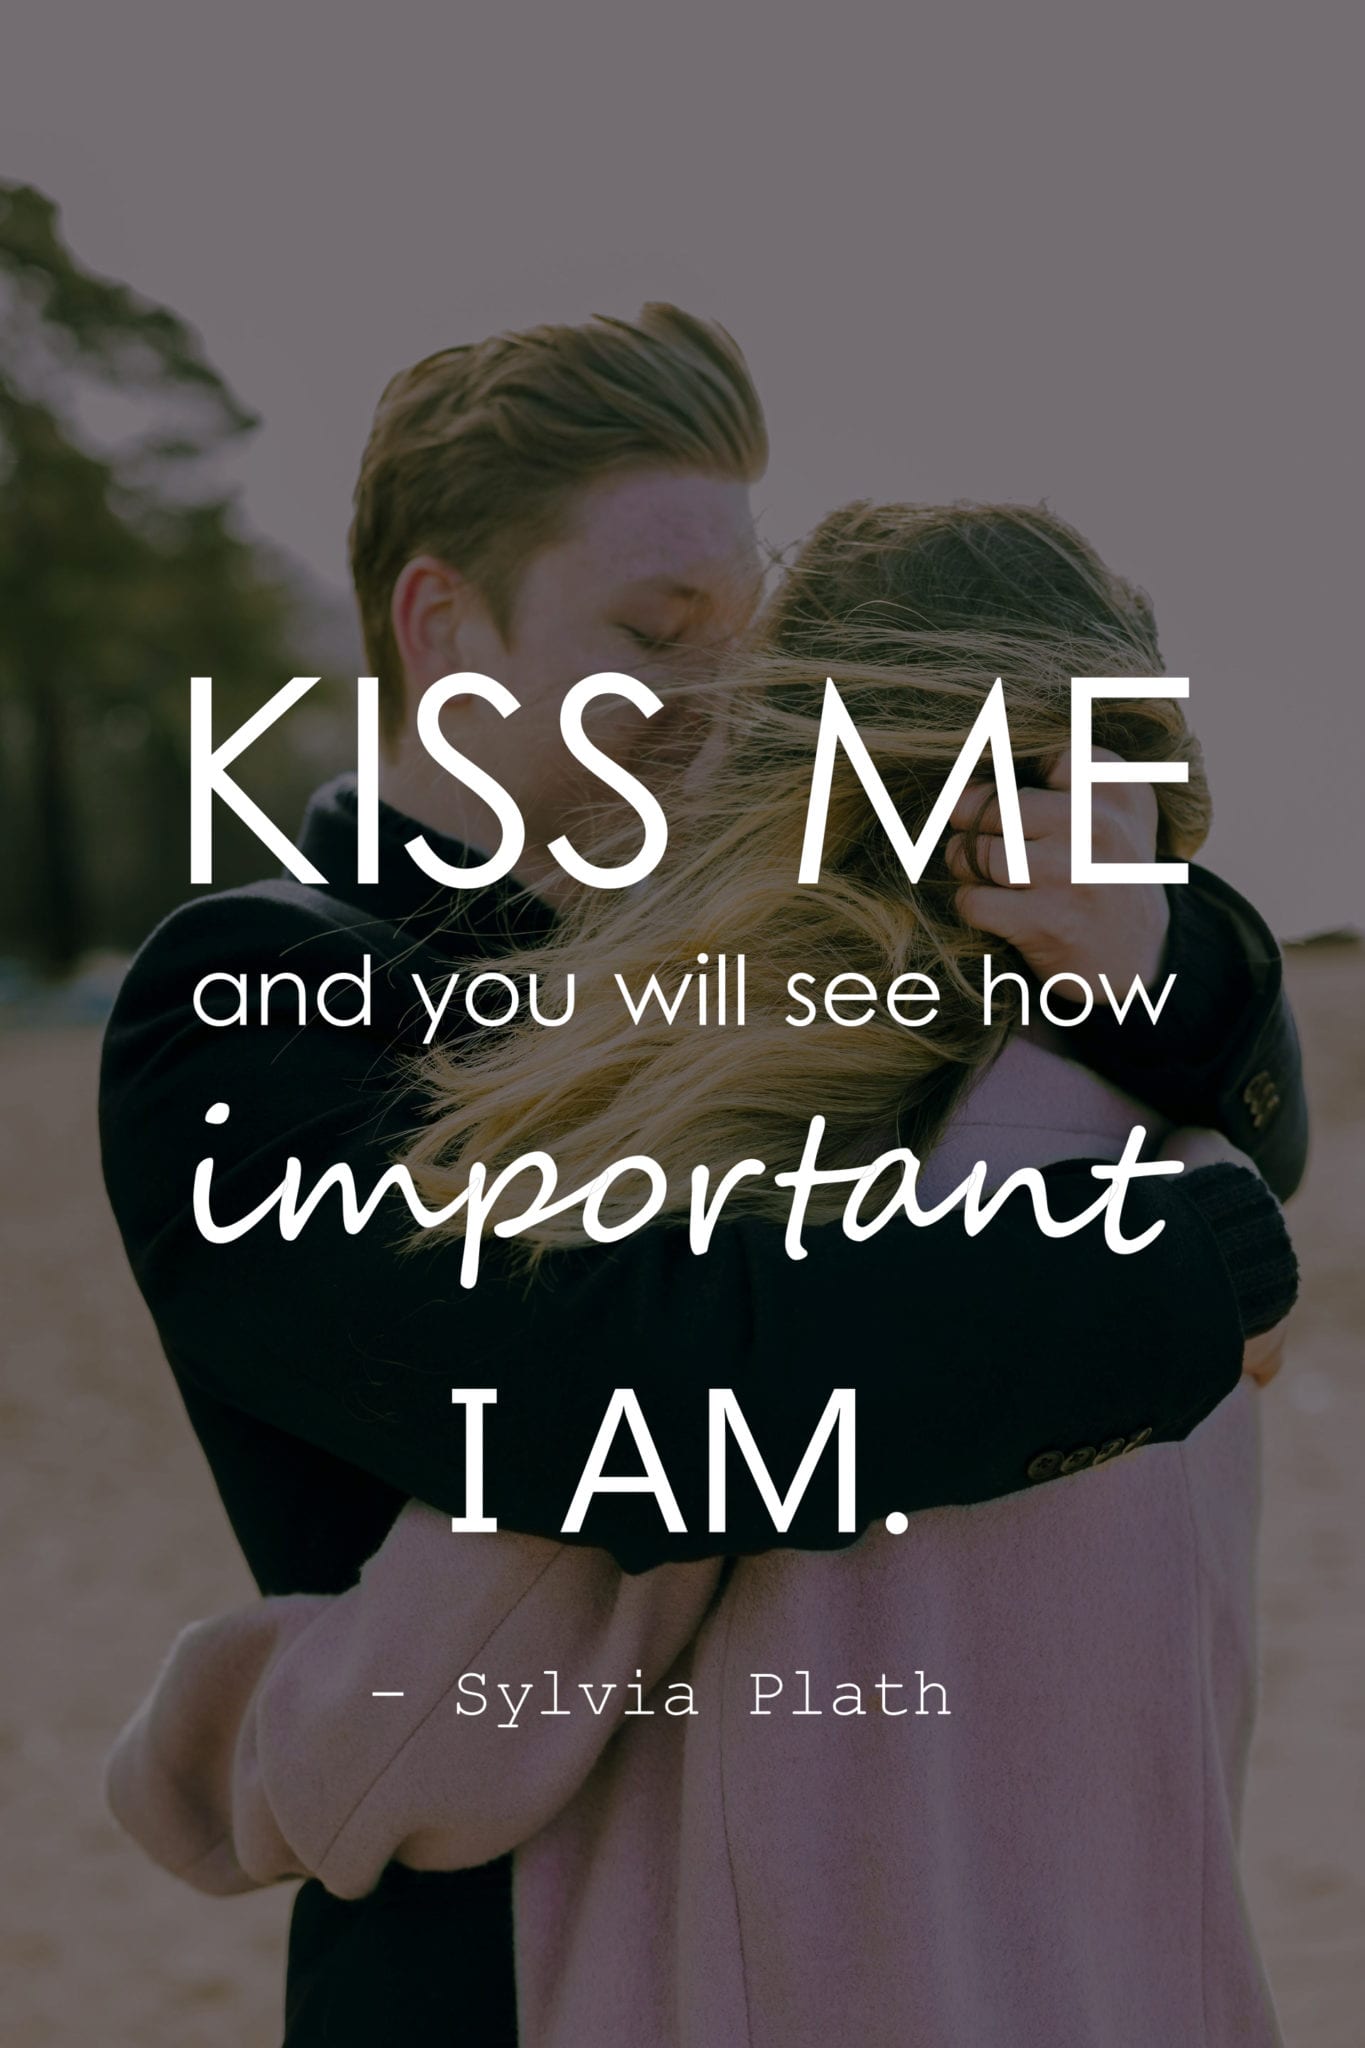 Kissing Quotes: 45 Romantic Kiss Quotes With Images